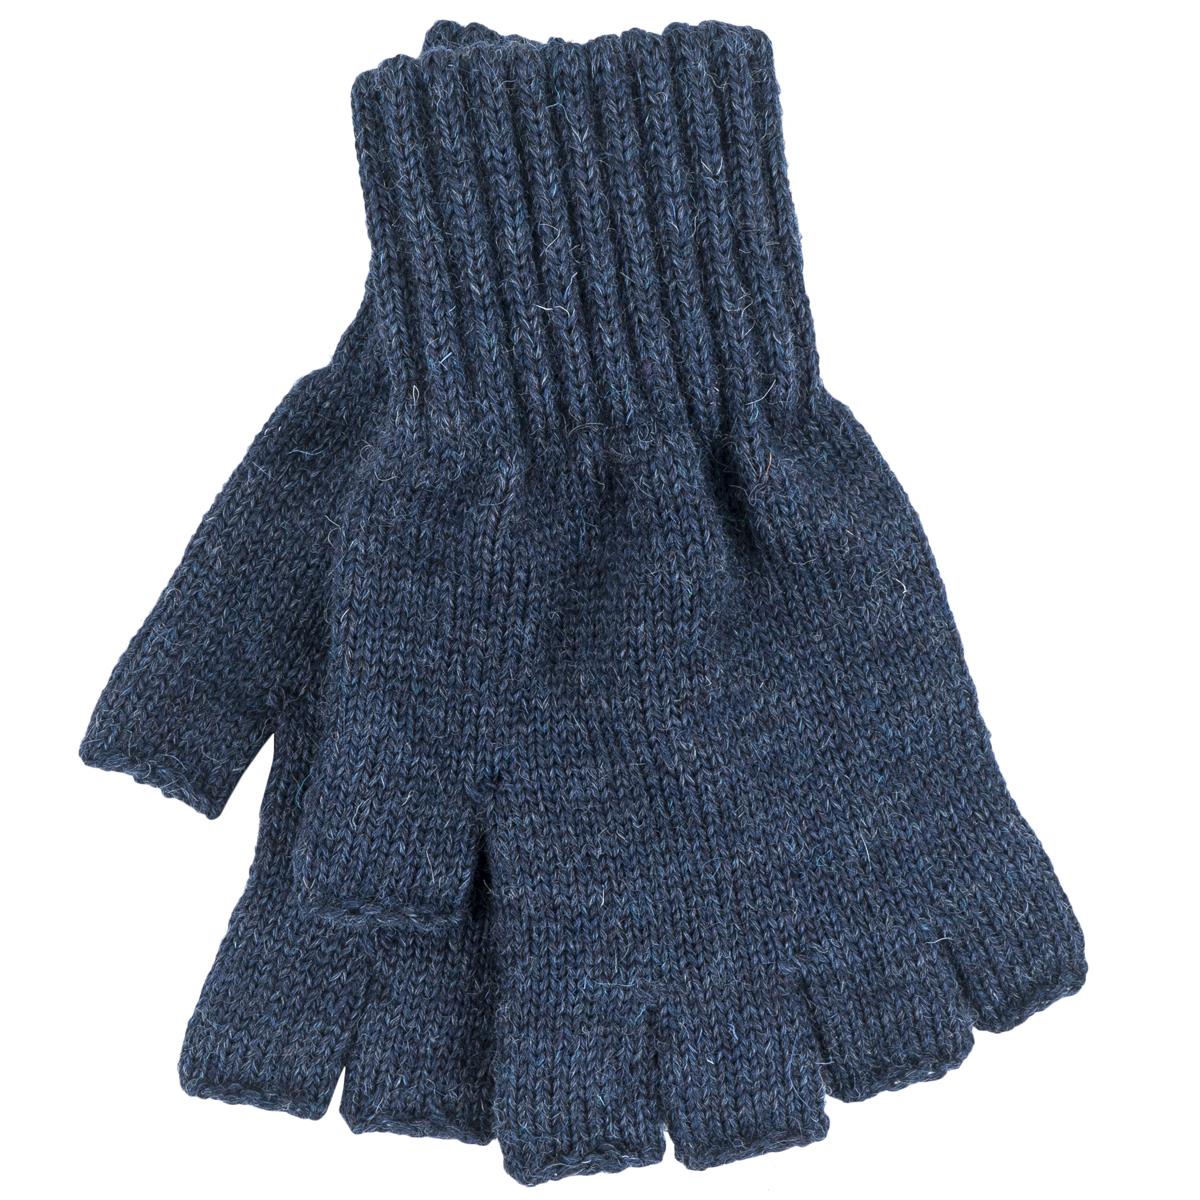 What is the function of the ribbed cuff on Barbour fingerless gloves?